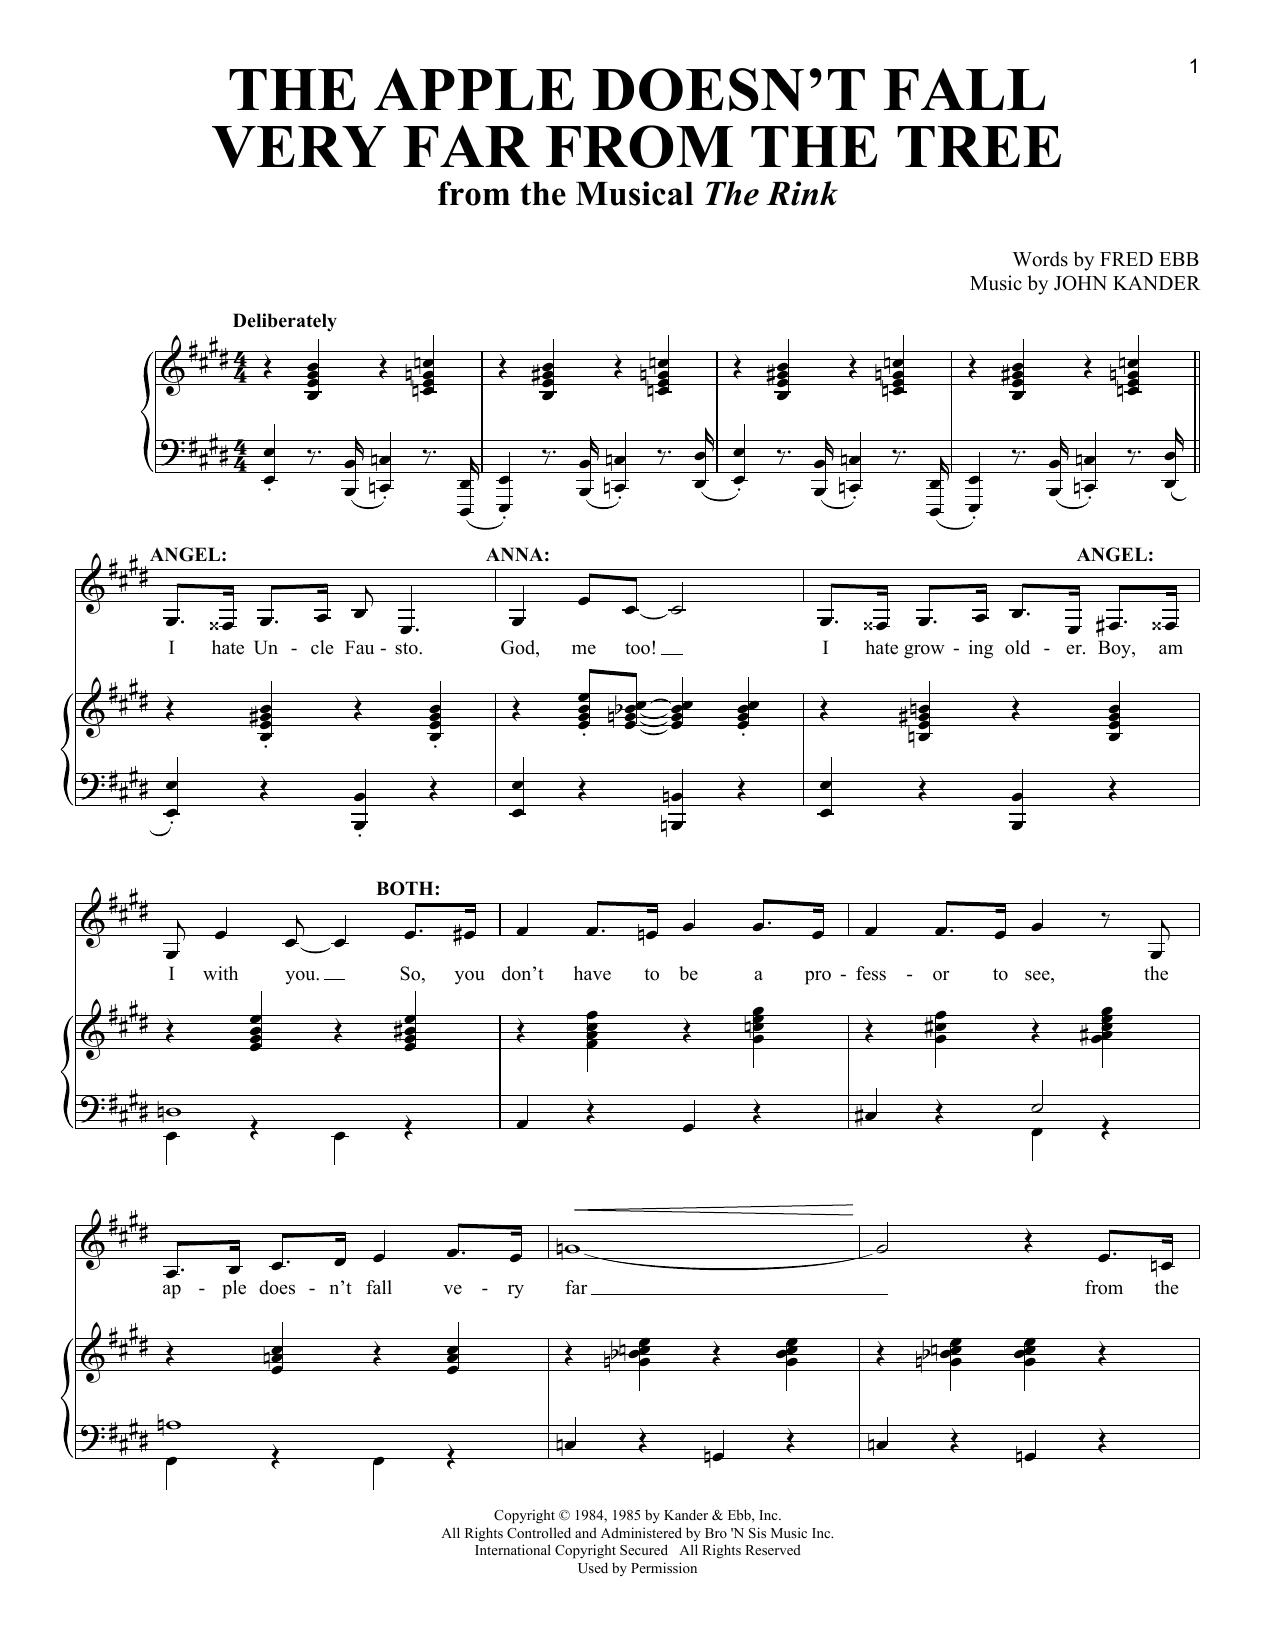 Fred Ebb The Apple Doesn't Fall Very Far From The Tree sheet music notes and chords. Download Printable PDF.